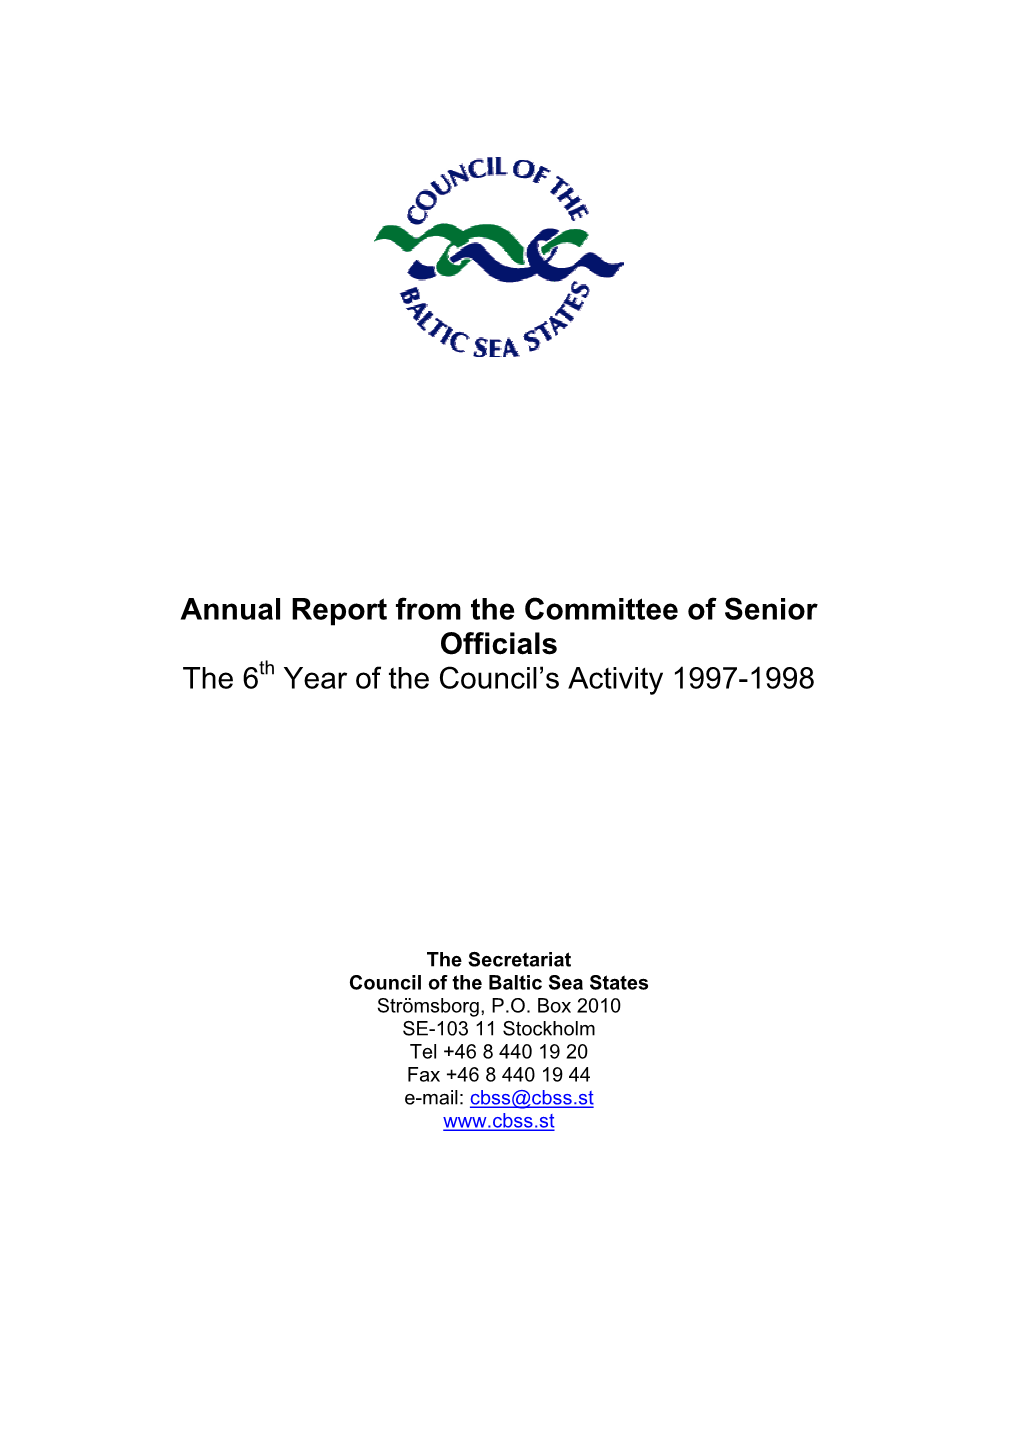 Annual Report from the Committee of Senior Officials the 6 Year of The